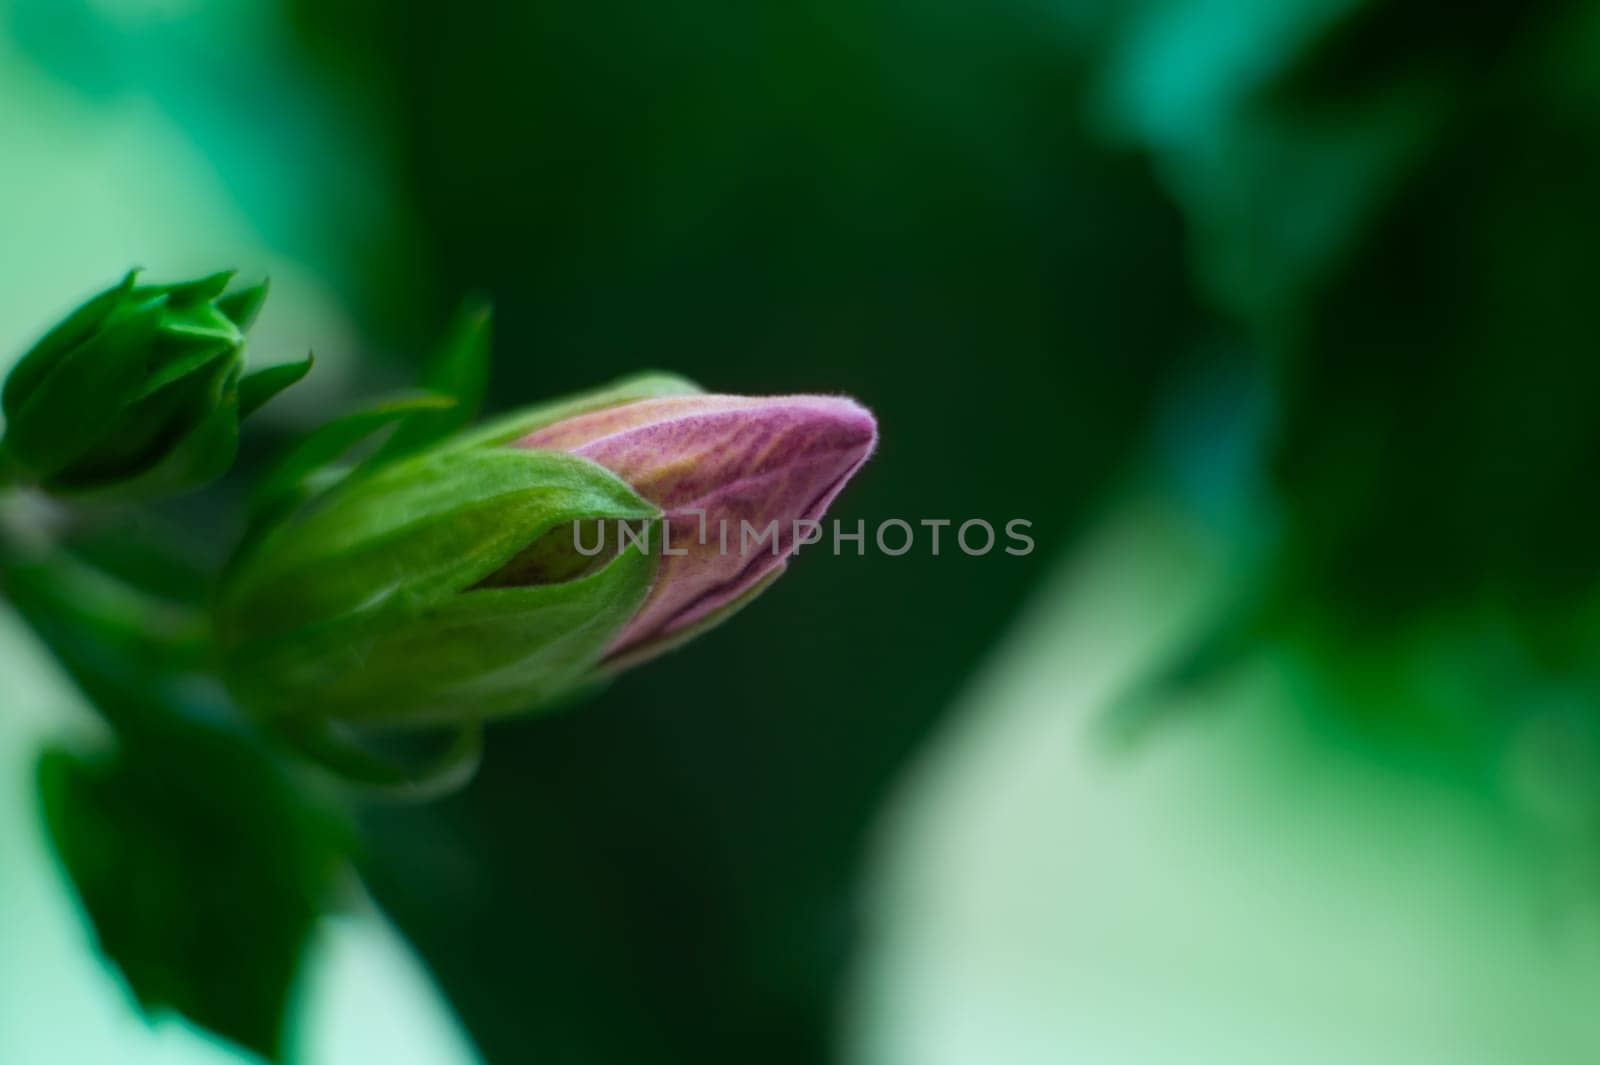 Closed bud of blooming red hibiscus flower of Sudanese rose aver green background by artgf